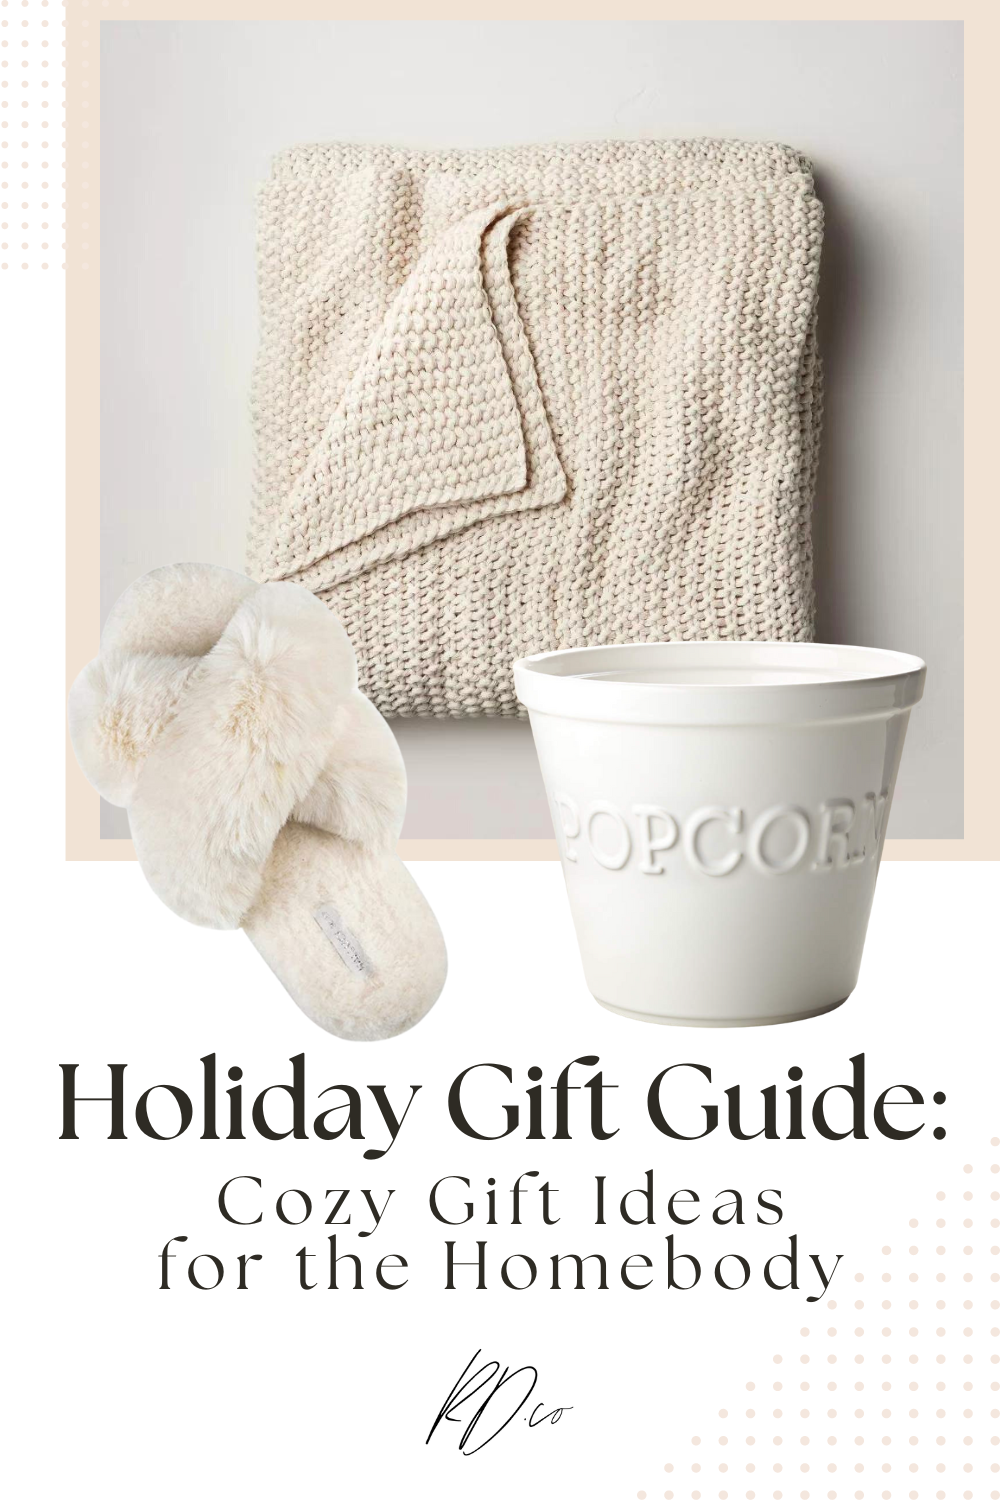 Cozy Gift Ideas for the Homebody